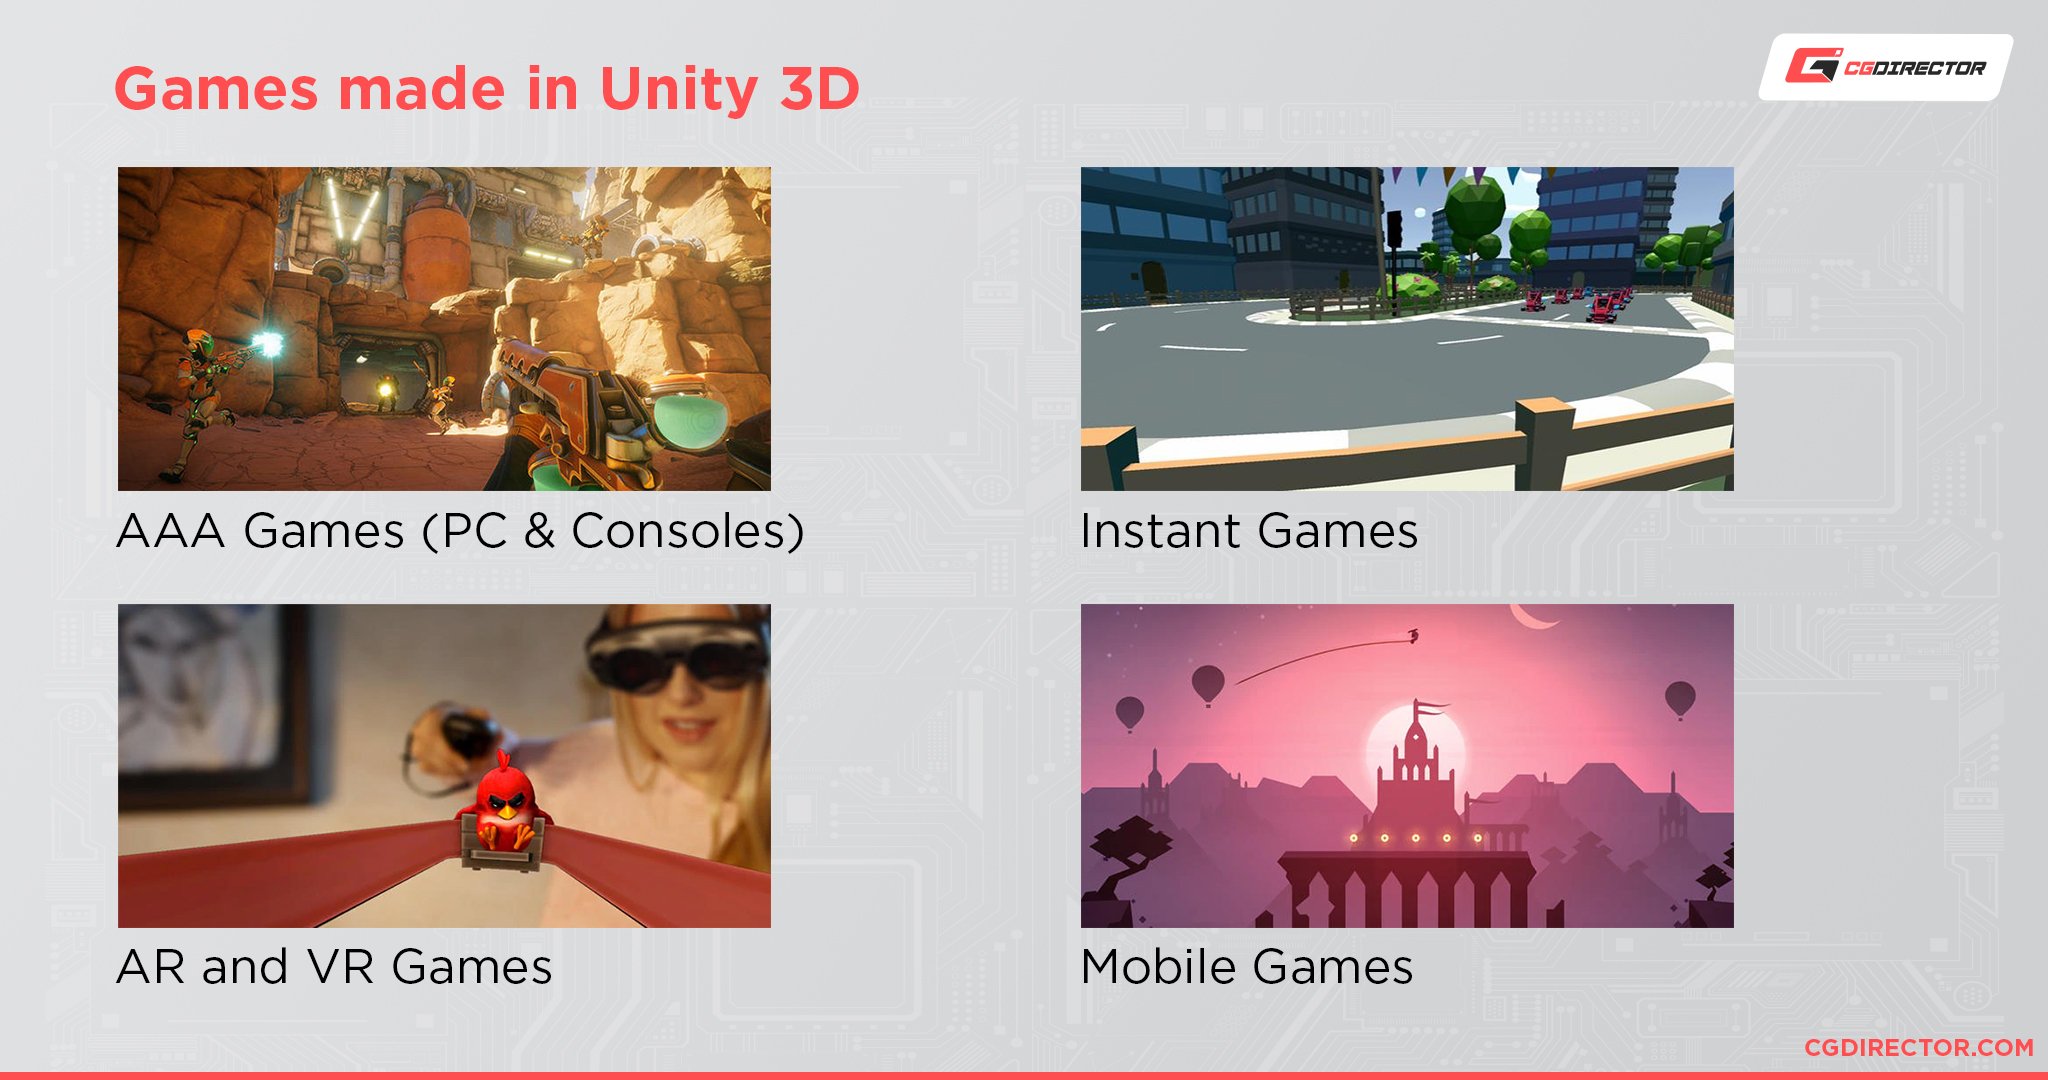 Games made in Unity 3D